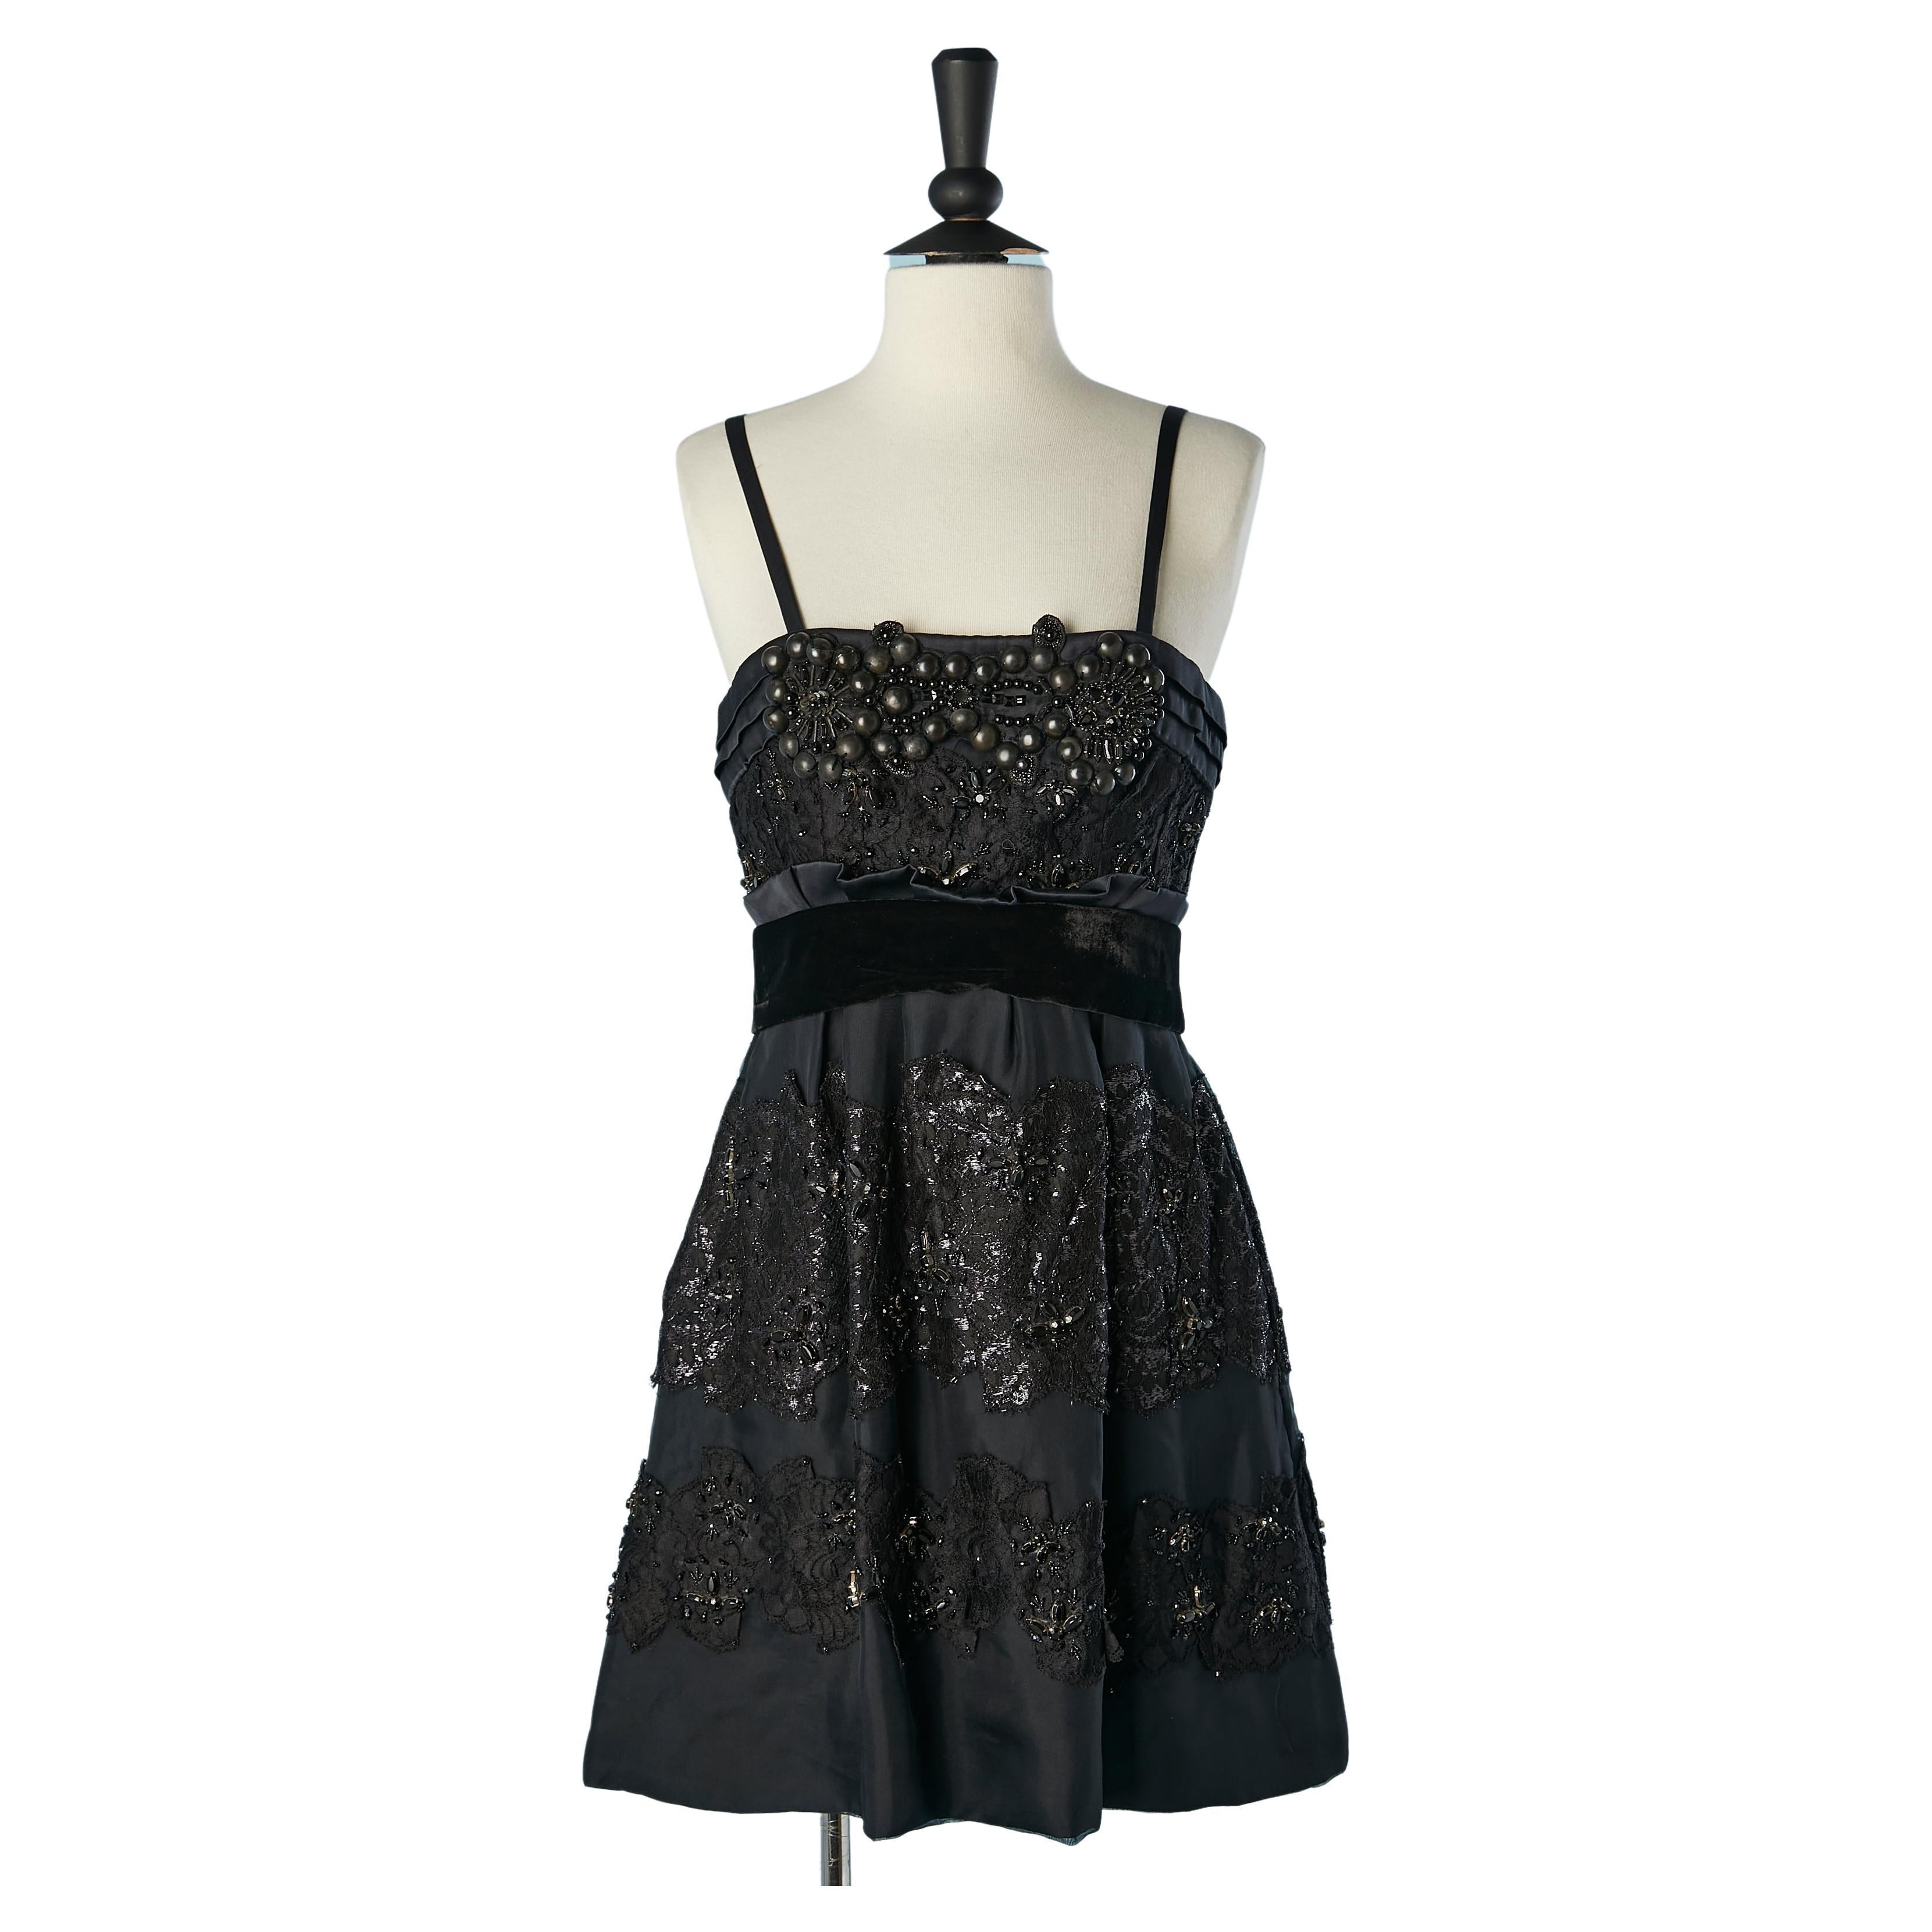 Black cocktail dress with lace, beads and velvet belt Christian Lacroix  For Sale